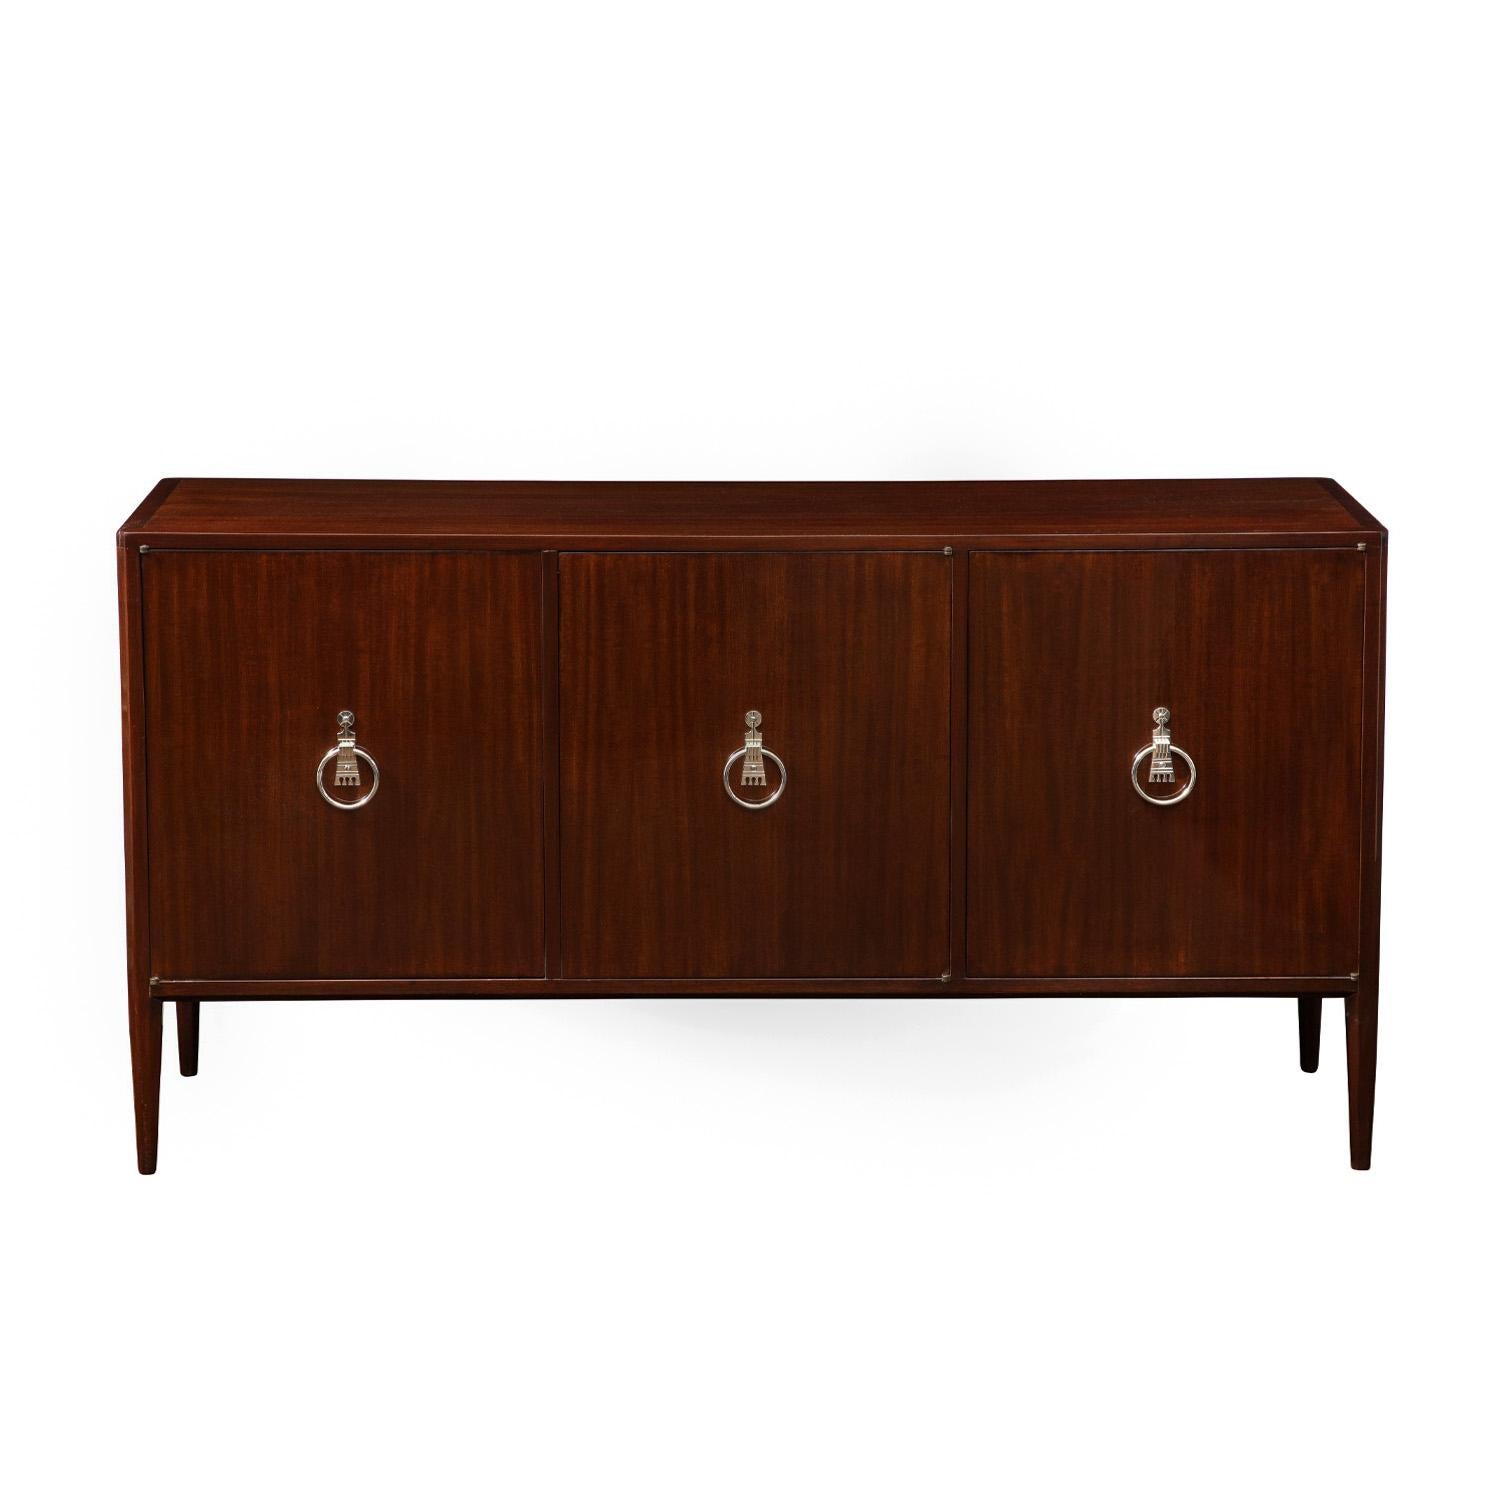 Beautifully crafted 3 door credenza in high gloss mahogany with exquisite etched nickel pulls by Tommi Parzinger for Parzinger Originals, American 1960s. This piece exudes refinement and elegance in a way only Parzinger could create.